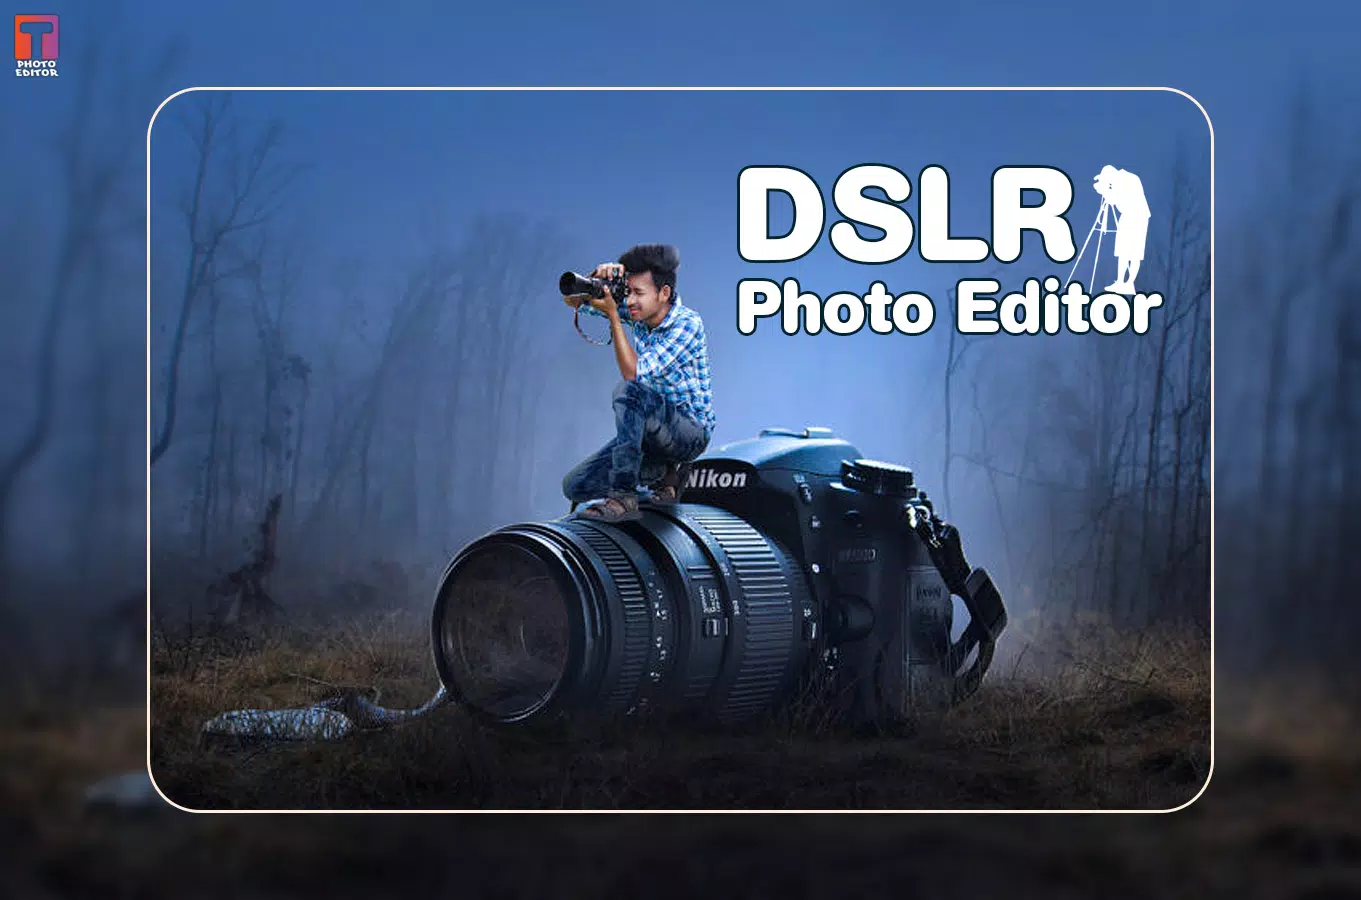 Dslr Cut Cut - Background Changer & Photo Editor APK for Android ...